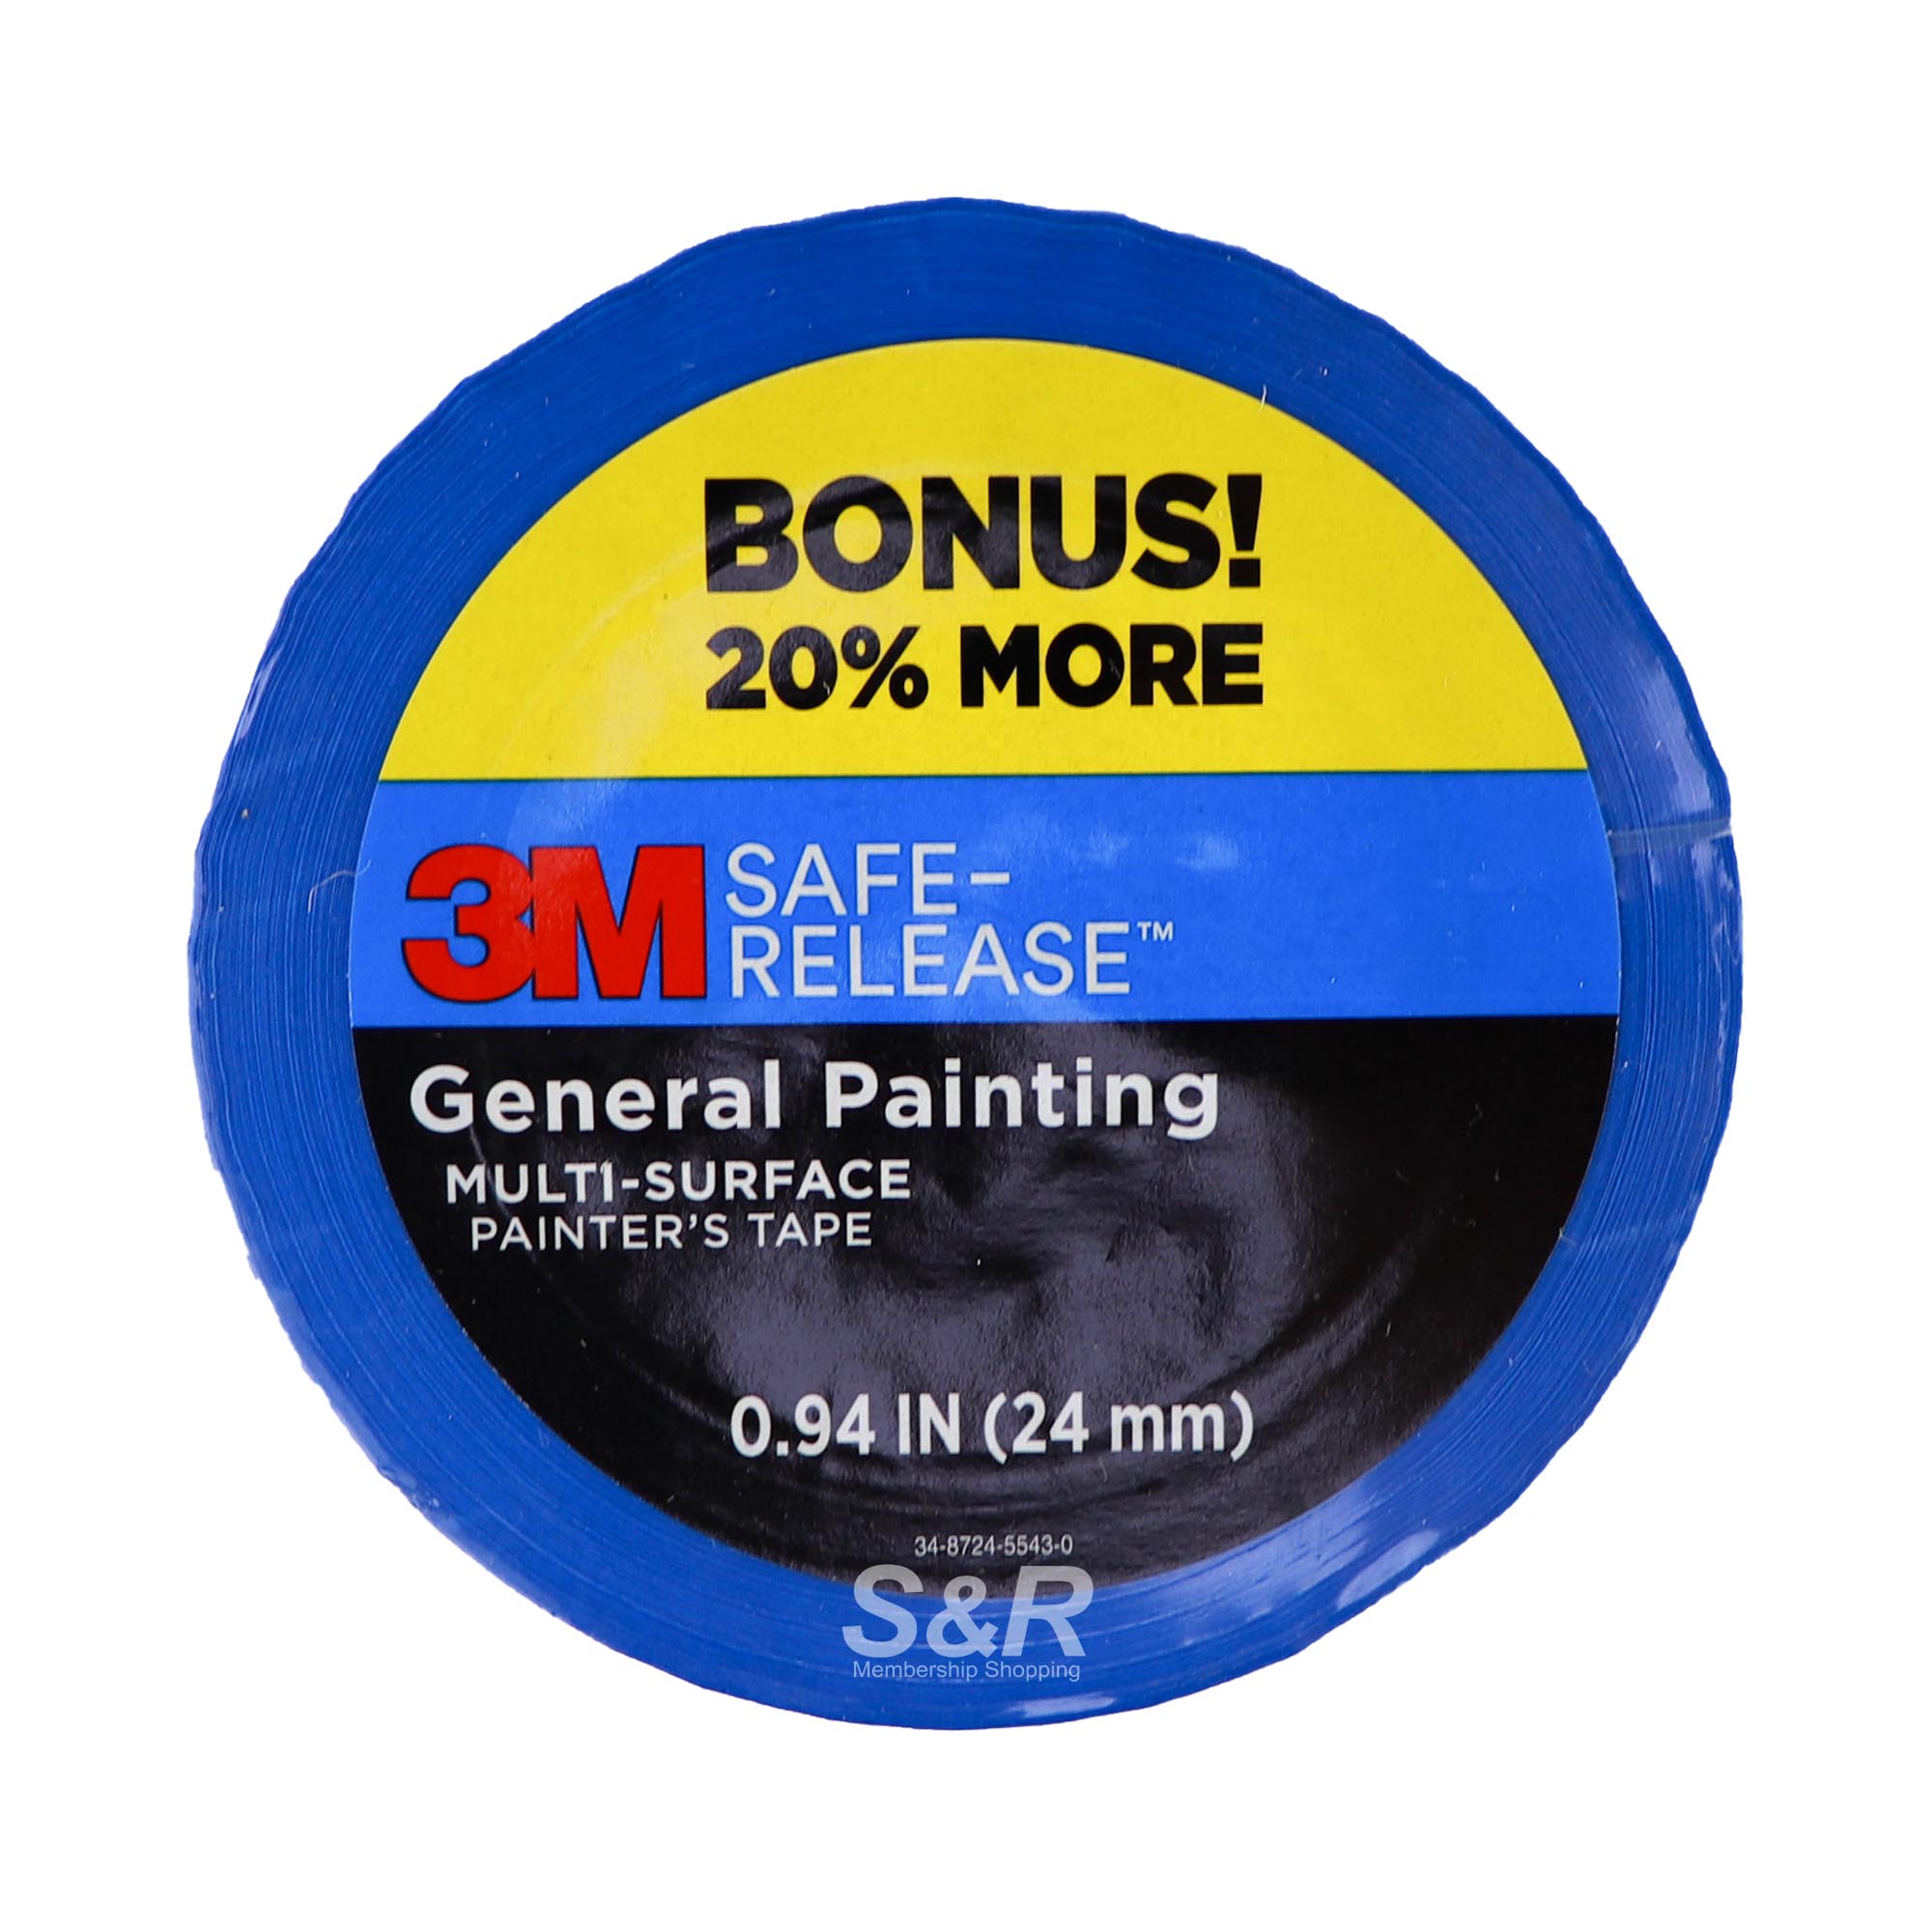 3M Safe-Release General Painting Multi-Surface Painter's Tape 1pc